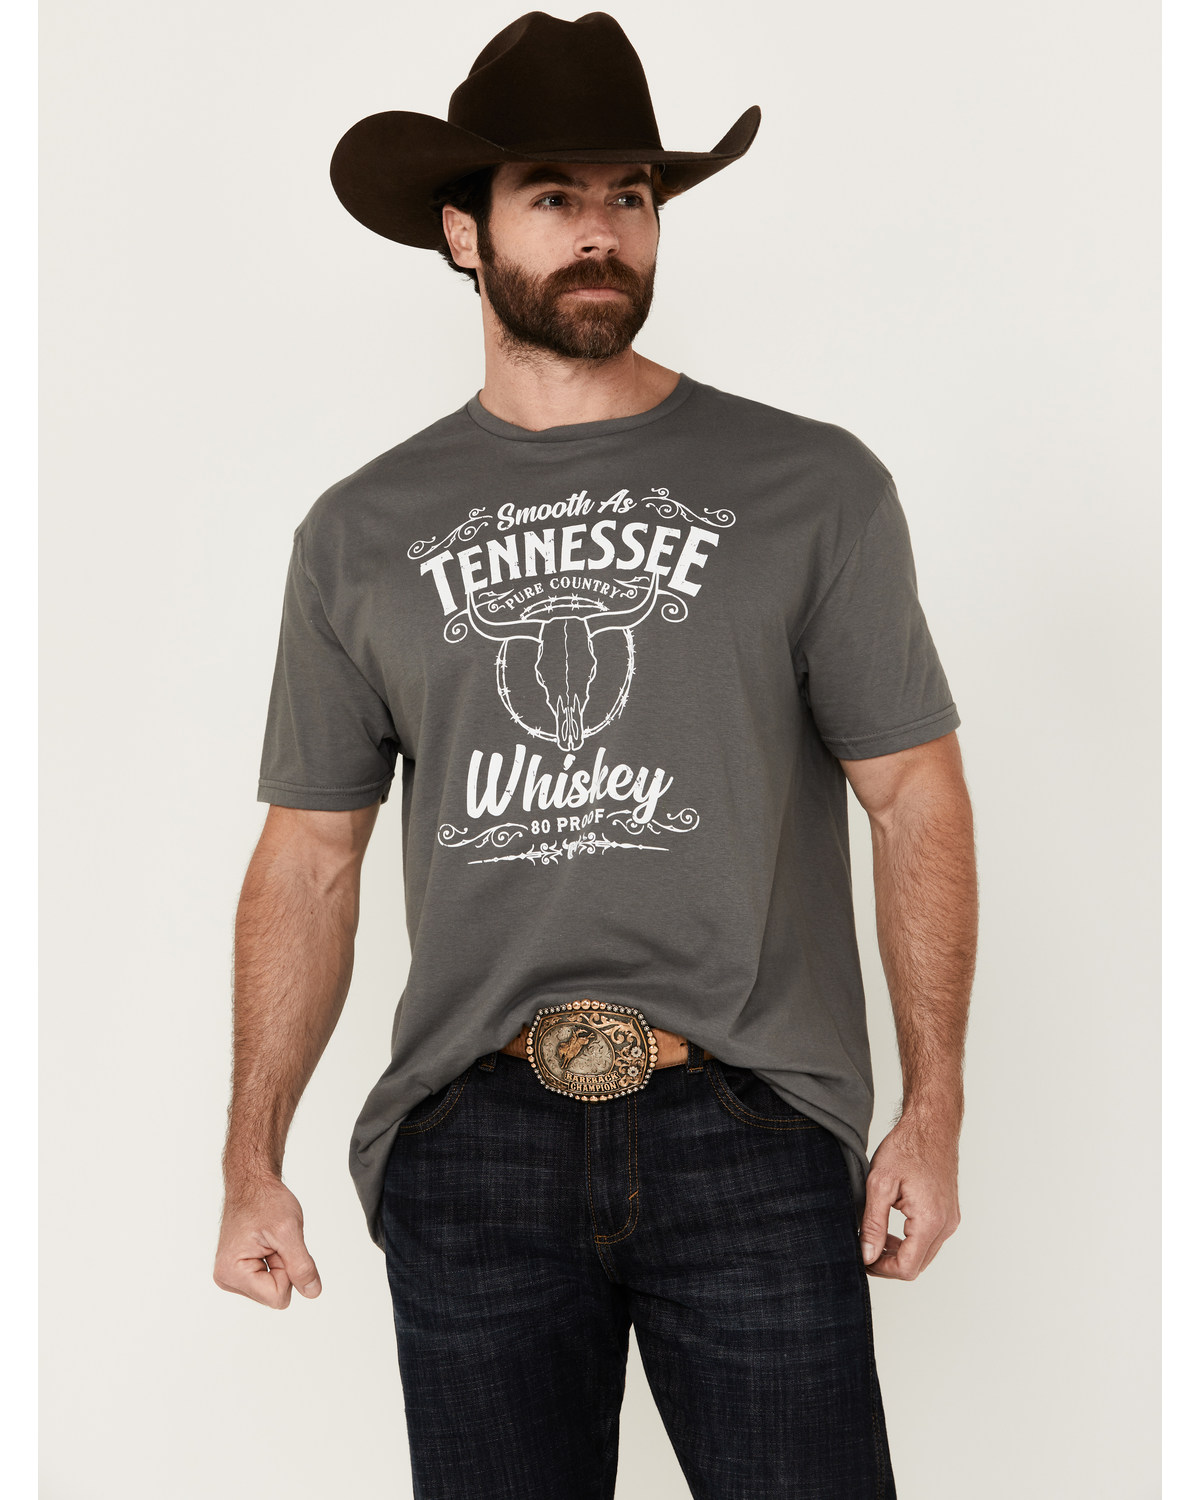 Cowboy Hardware Men's Boot Barn Exclusive Tennessee Whiskey Short Sleeve Graphic T-Shirt